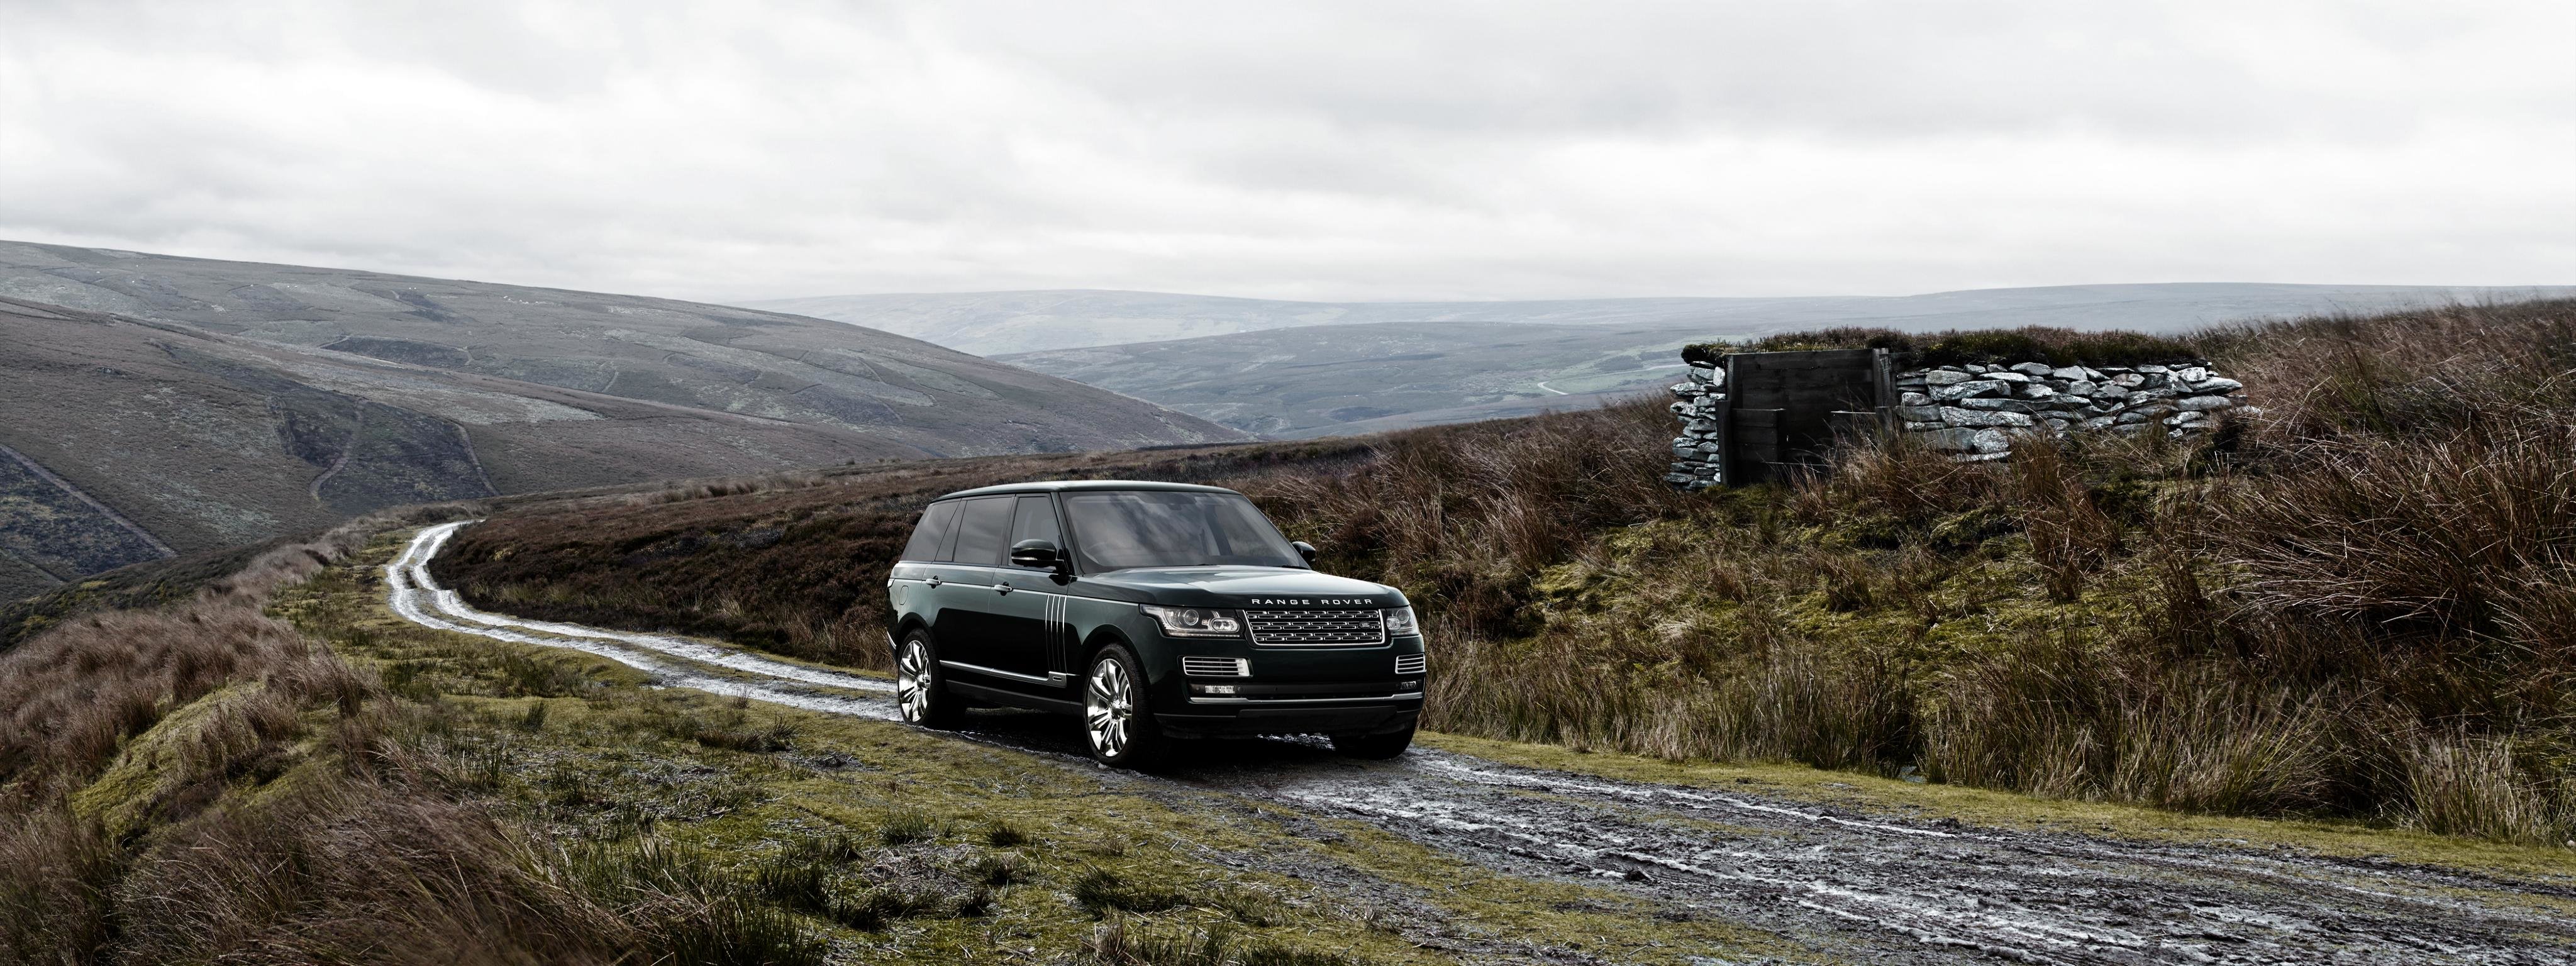 Awesome Range Rover free background ID:162861 for dual screen 4096x1536 desktop